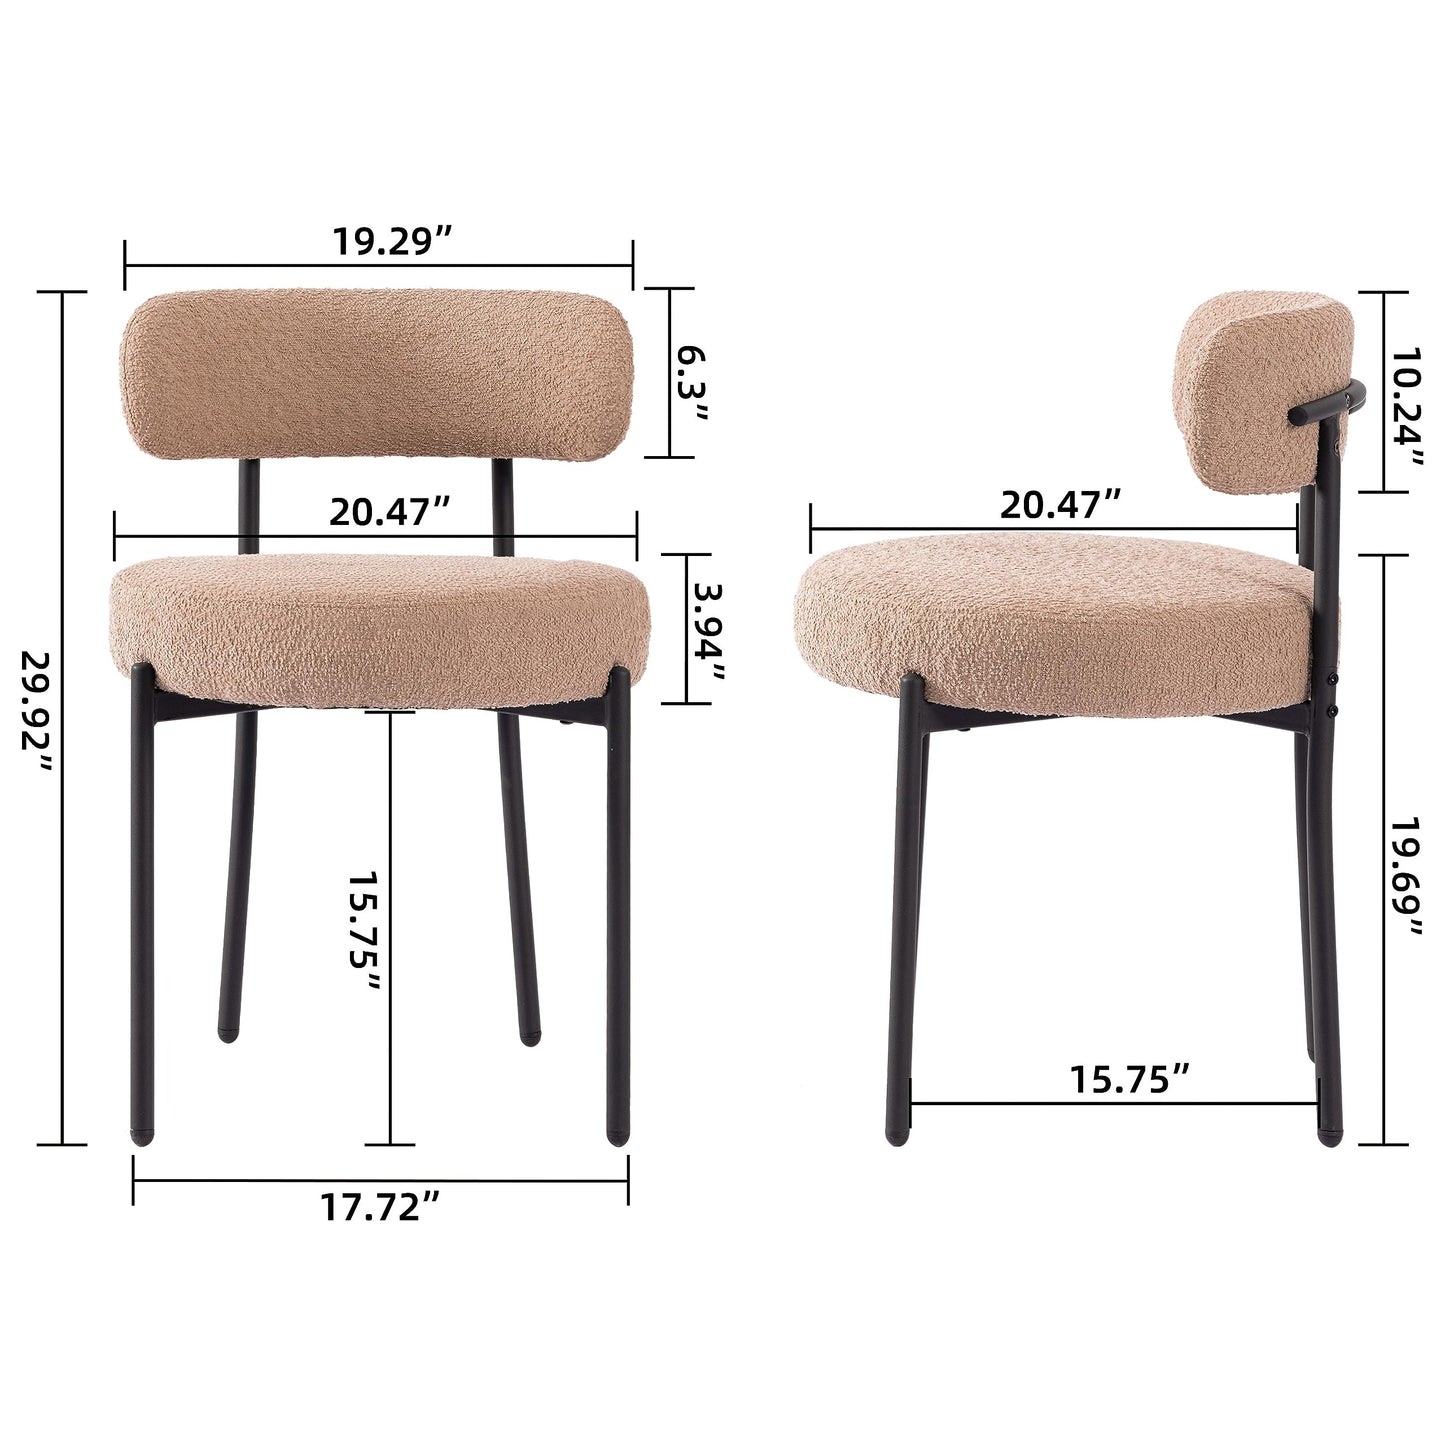 AISALL Light Brown Dining Chairs Set of 2 Round Upholstered Boucle Dining Room Chairs Mid-Century Modern Kitchen Chairs Curved Backrest Chairs for Dining Room Black Metal Legs